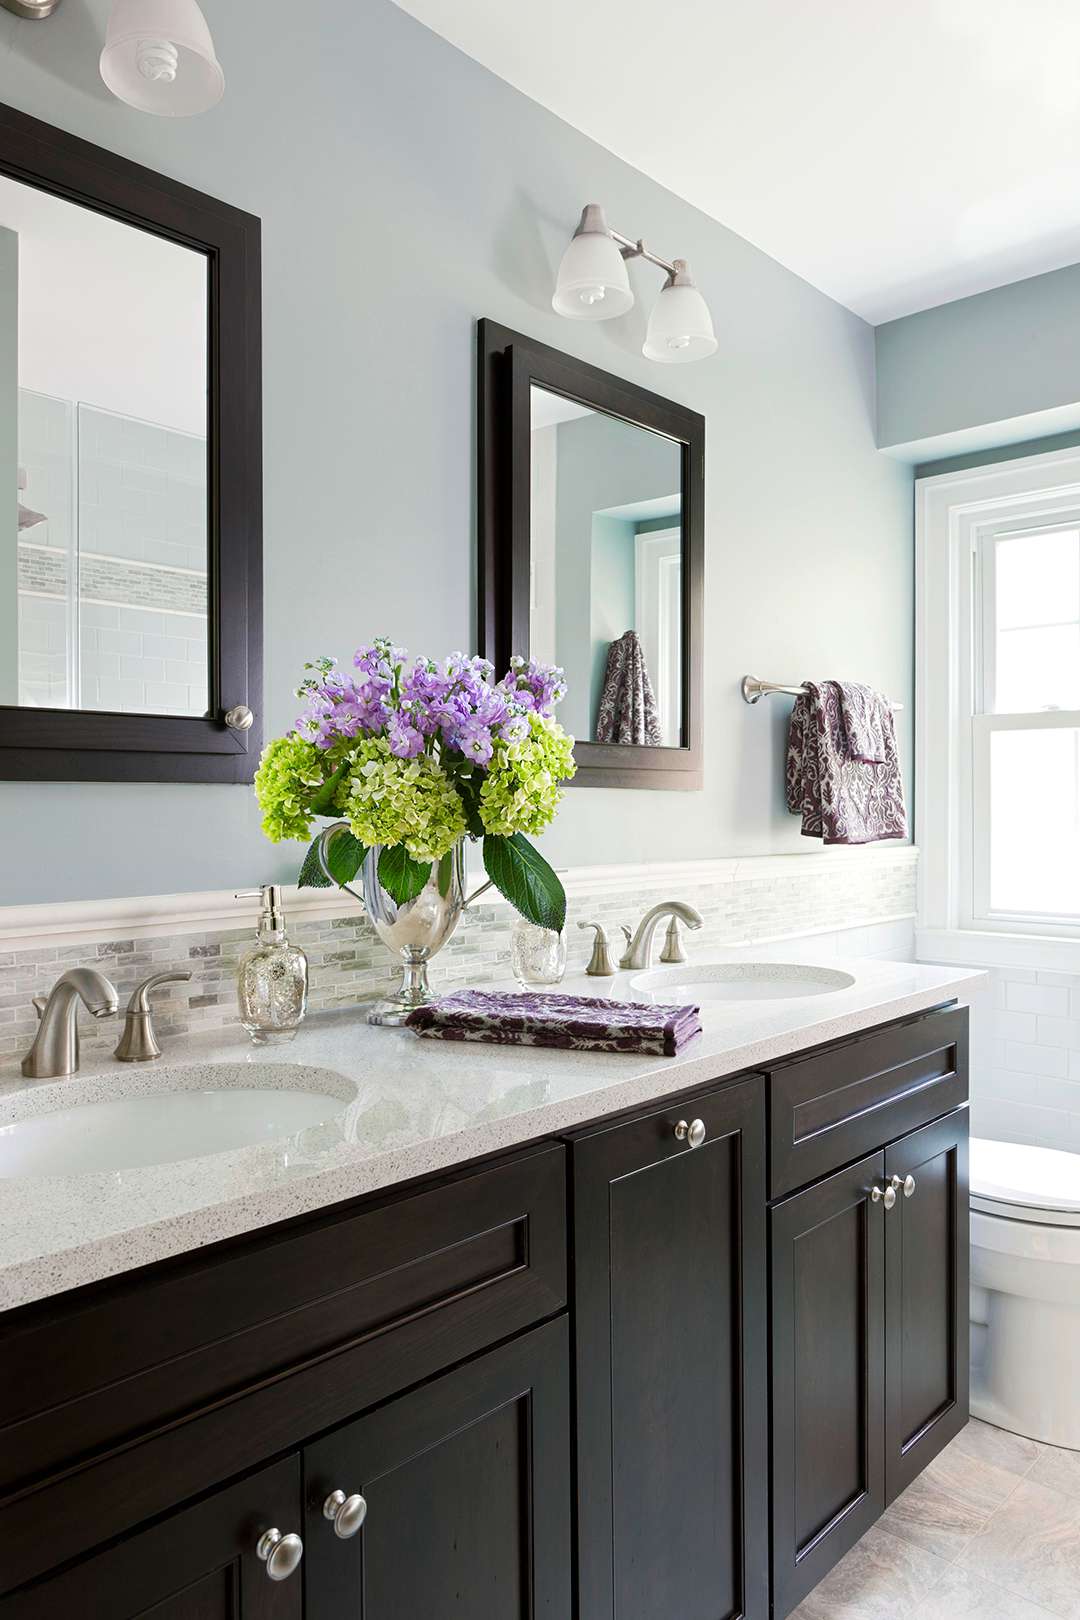 12 Popular Bathroom Paint Colors Our Editors Swear By Better Homes Gardens,Blue And White Porcelain Decorating Ideas